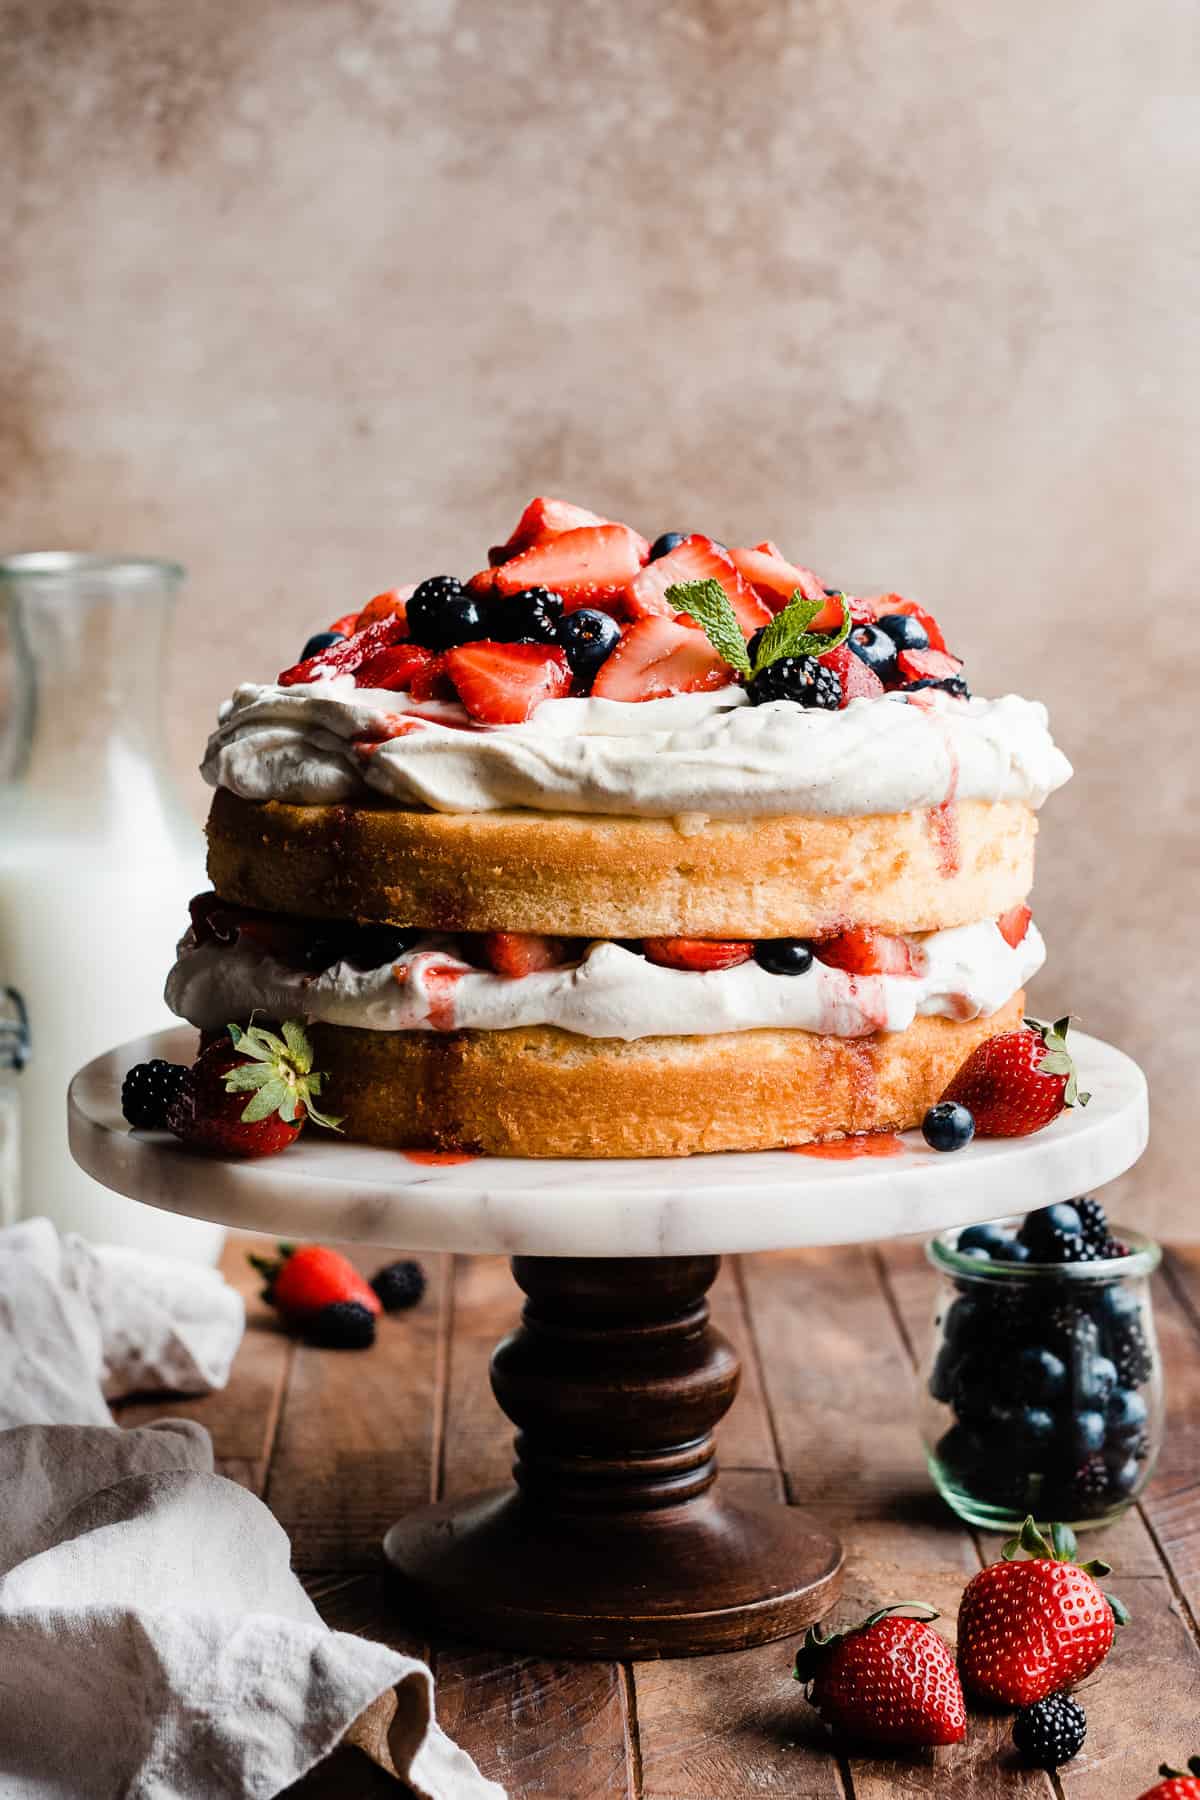 Two layers of vanilla cake with whipped cream and fresh berries.